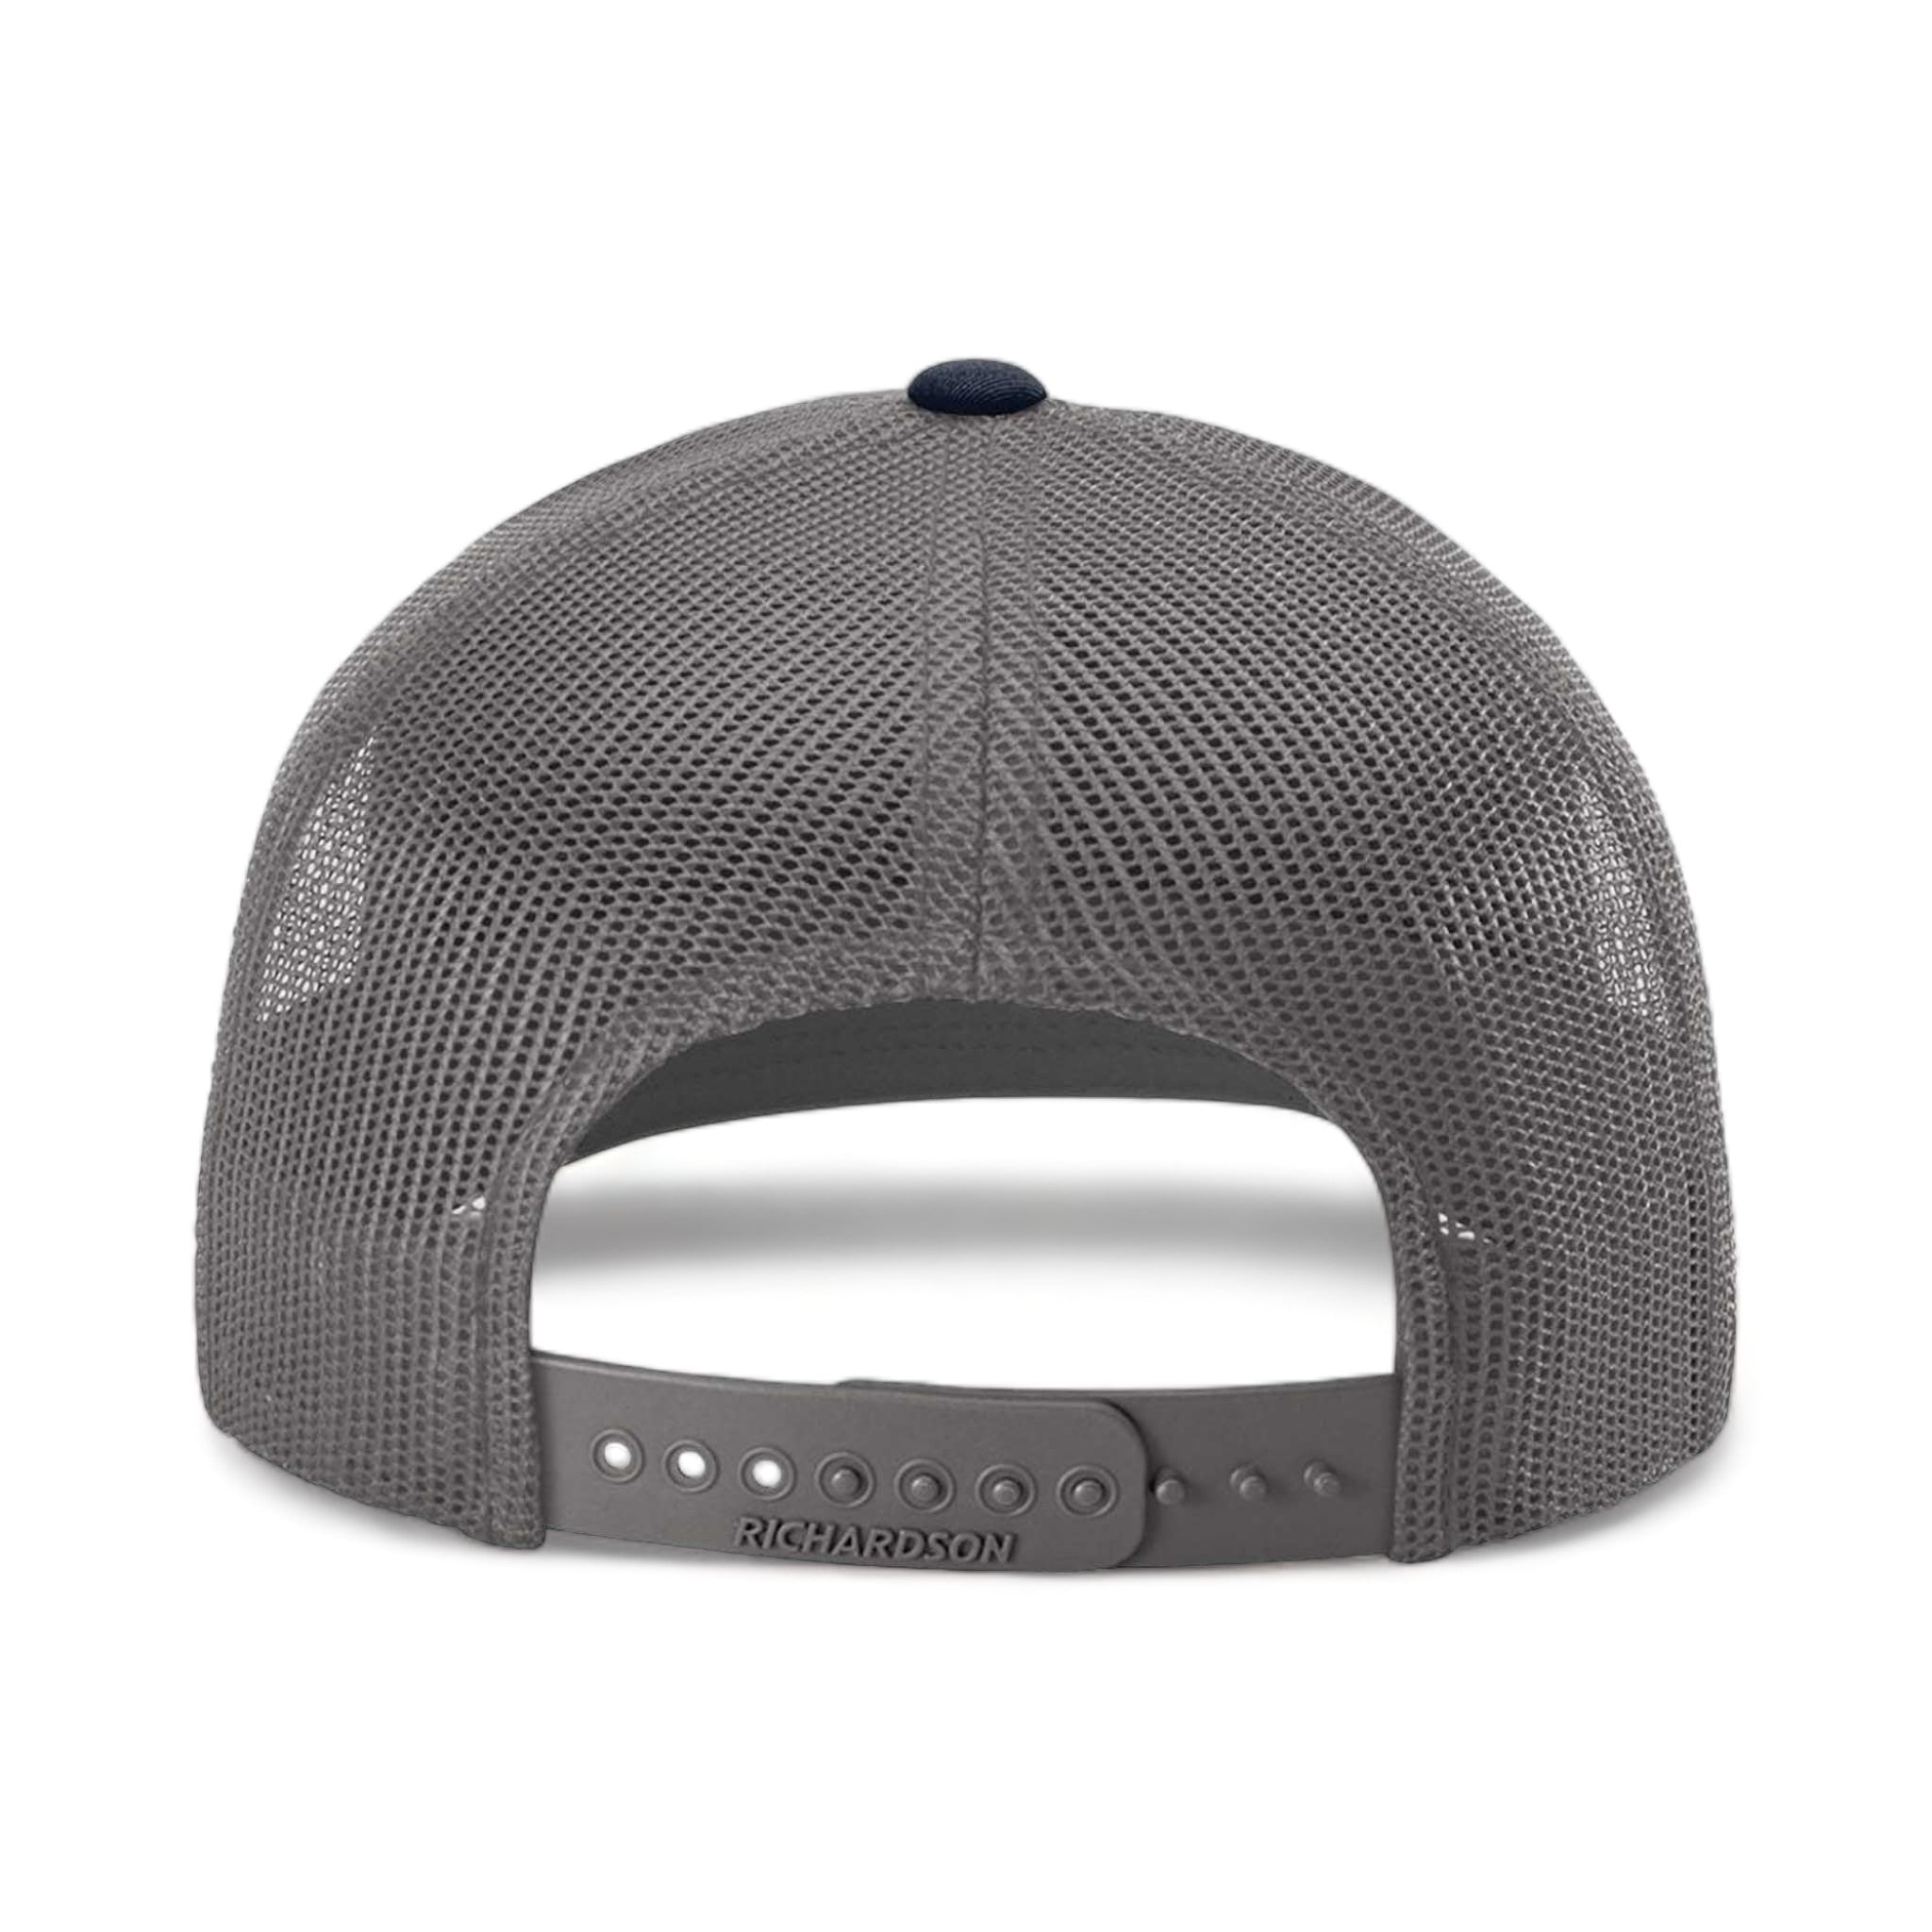 Back view of Richardson 112 custom hat in navy and charcoal